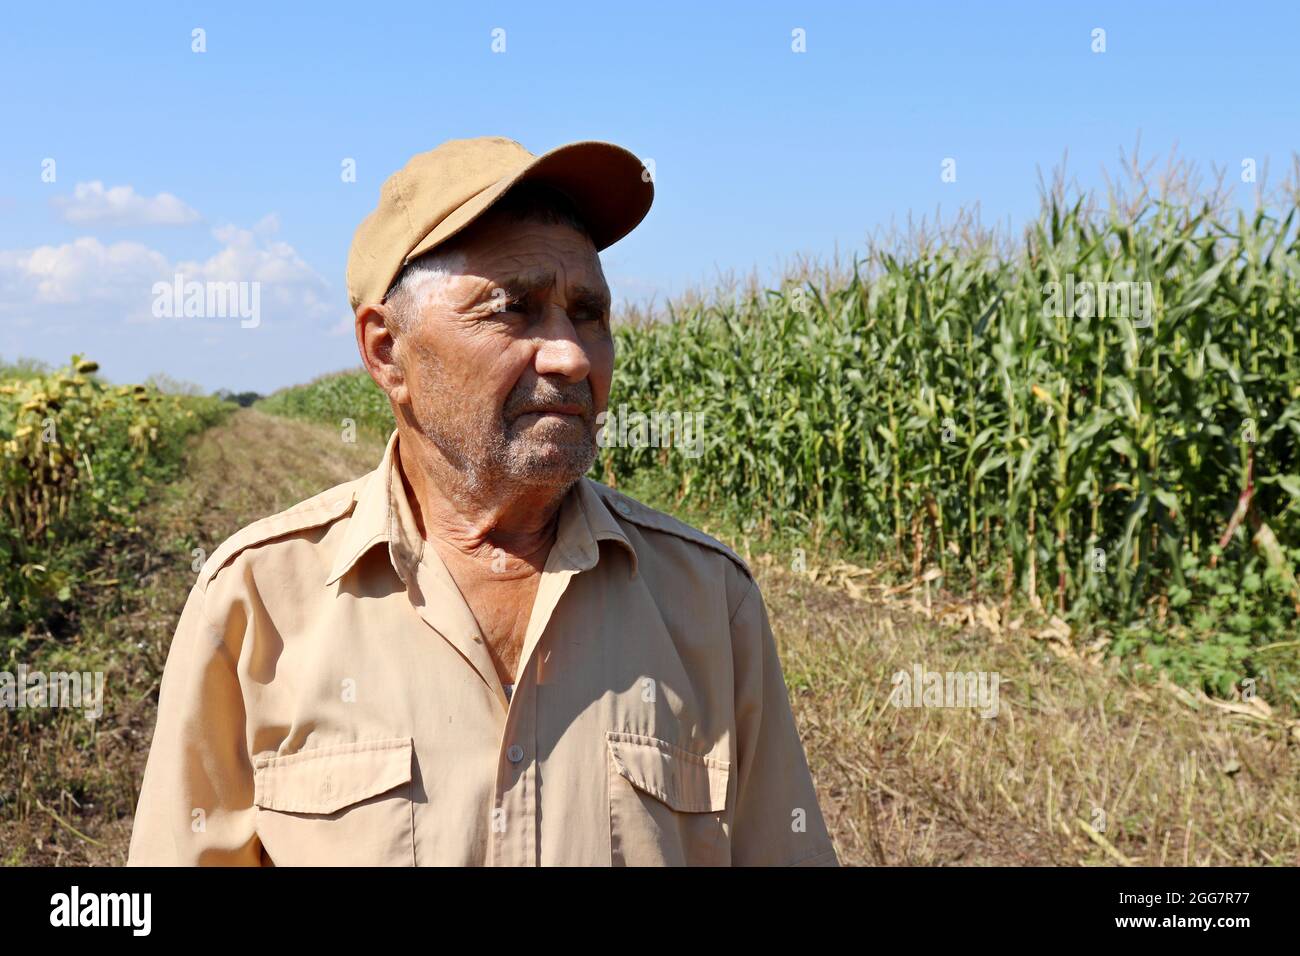 Old farmer stands on a green cornfield, elderly man in baseball cap inspects the crop. Work on farm in a sunny day, high corn stalks, good harvest Stock Photo